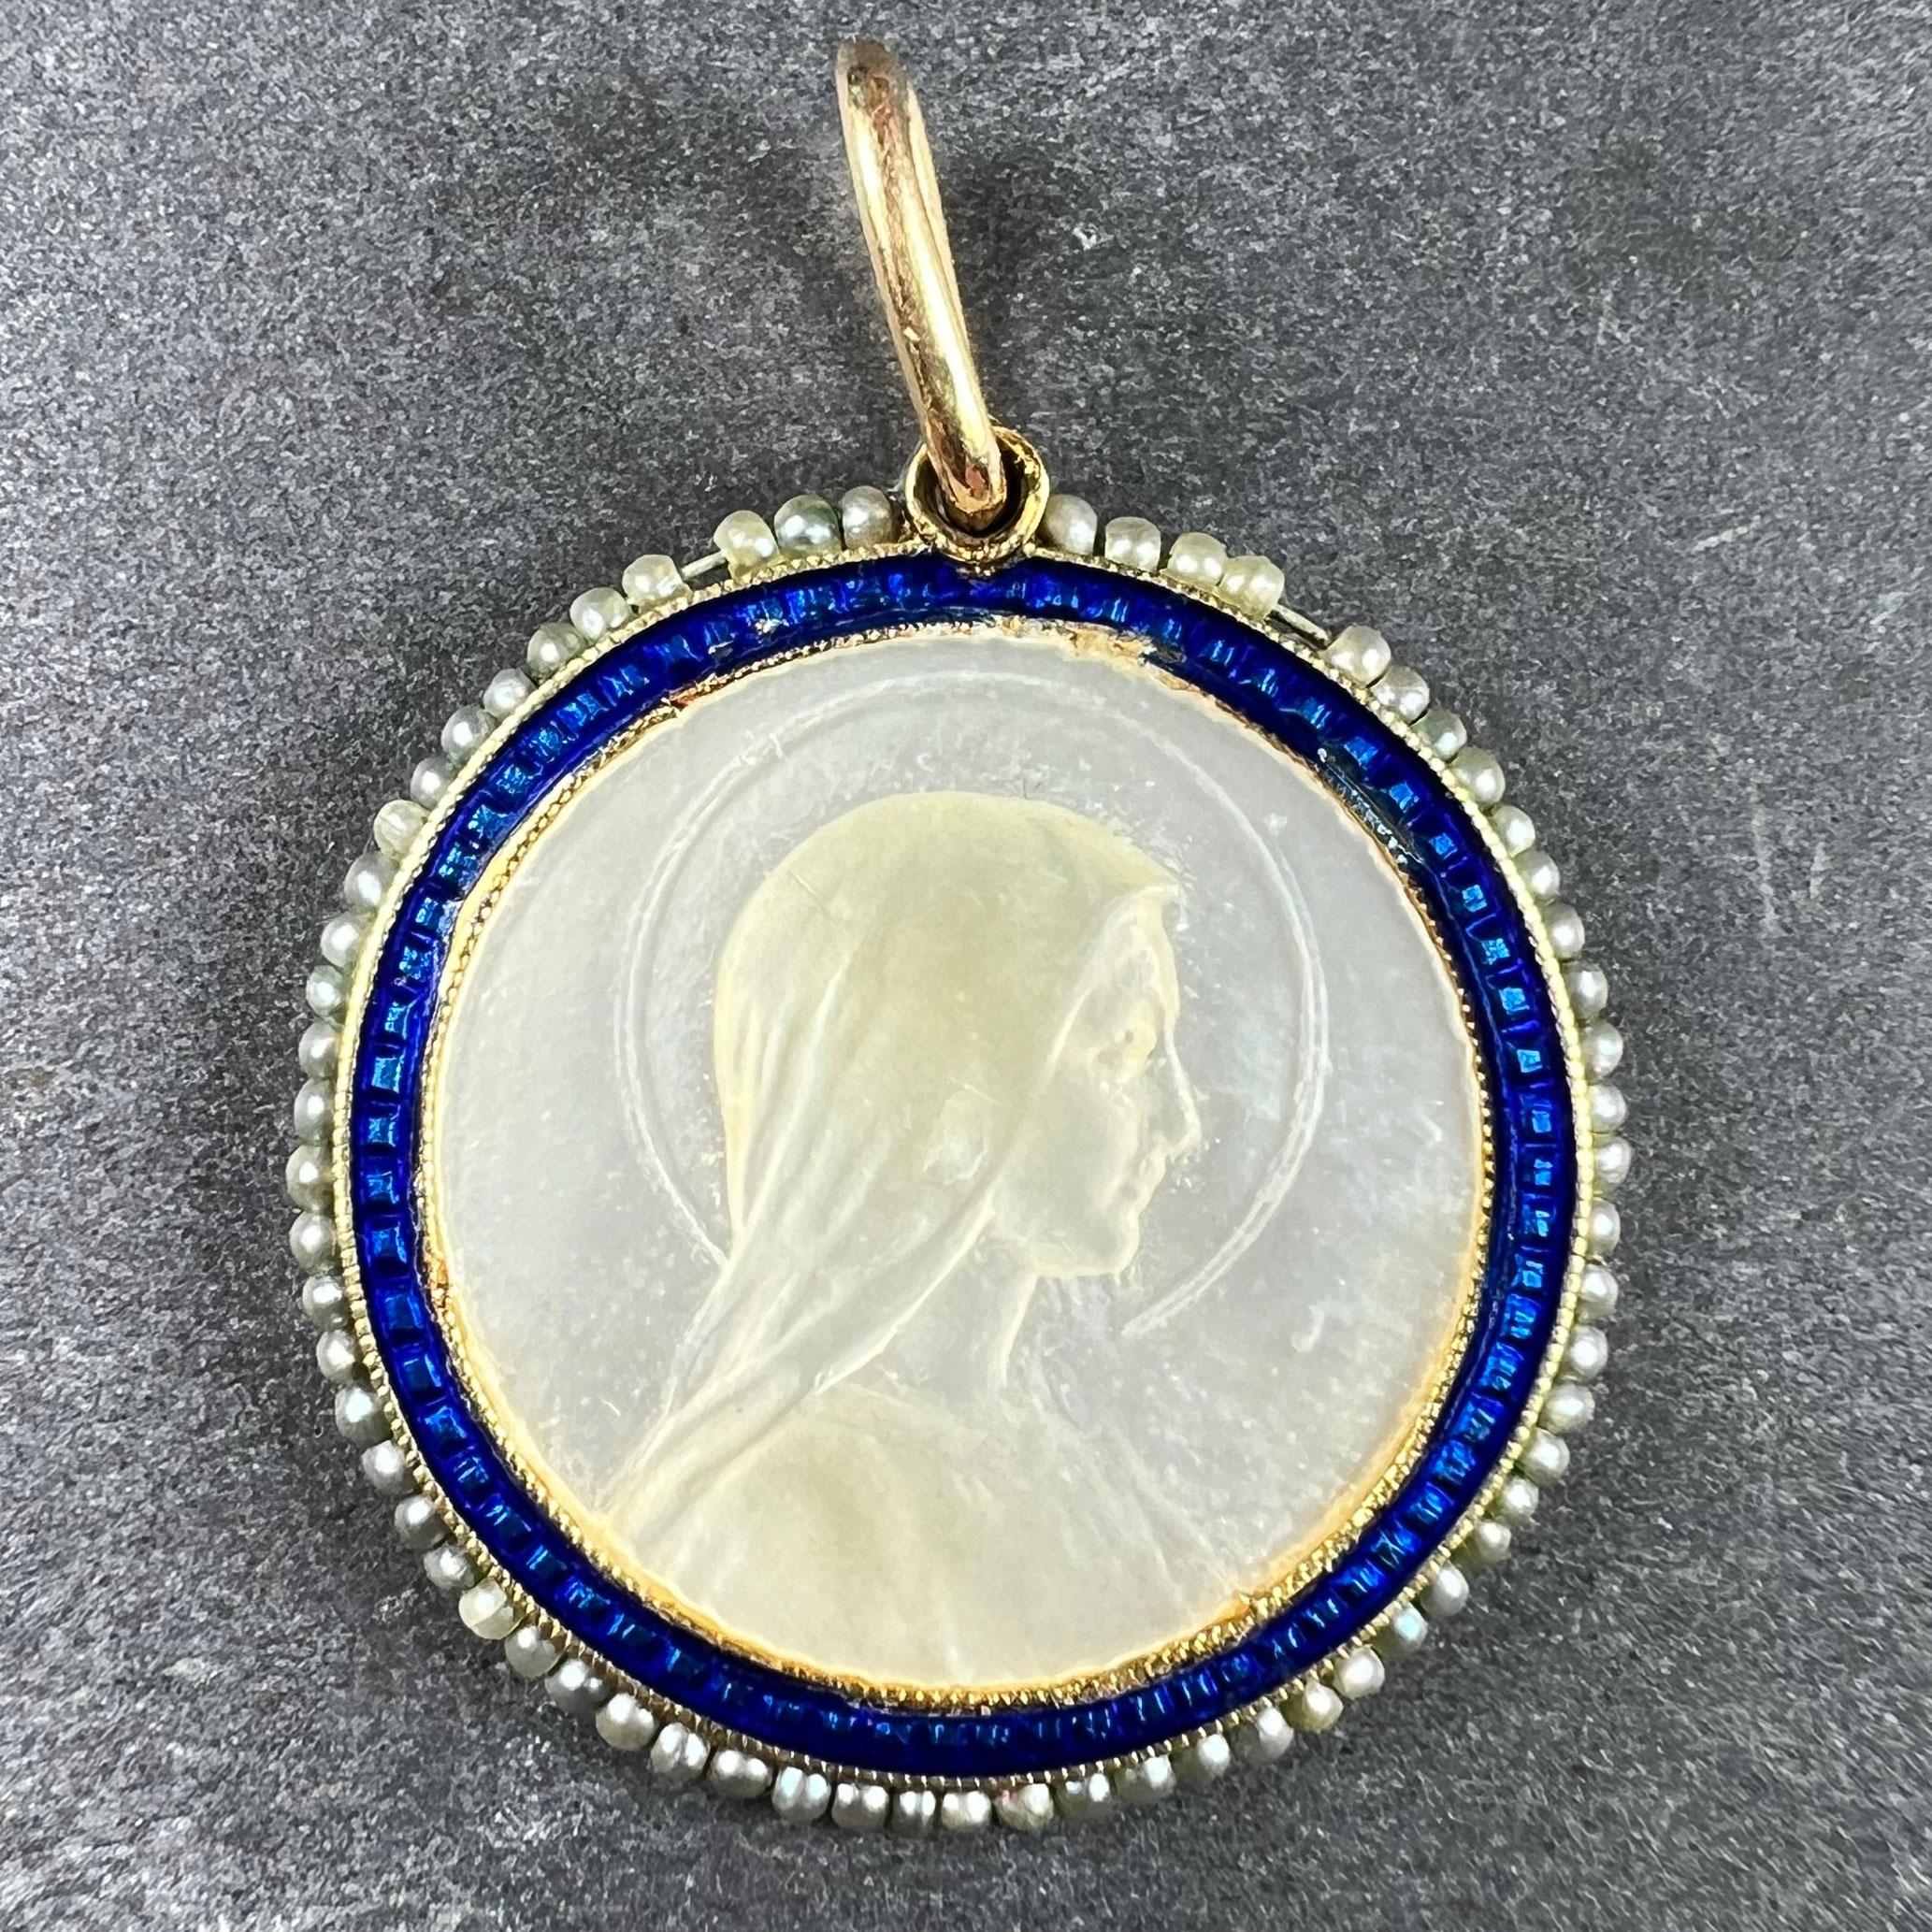 An 18 karat (18K) yellow gold charm pendant designed as a mother-of-pearl medal depicting the Virgin Mary within a blue enamel frame surrounded by 64 natural seed pearls. Umarked but tested for 18 karat gold.

Dimensions: 2.1 x 2 x 0.17 cm (not